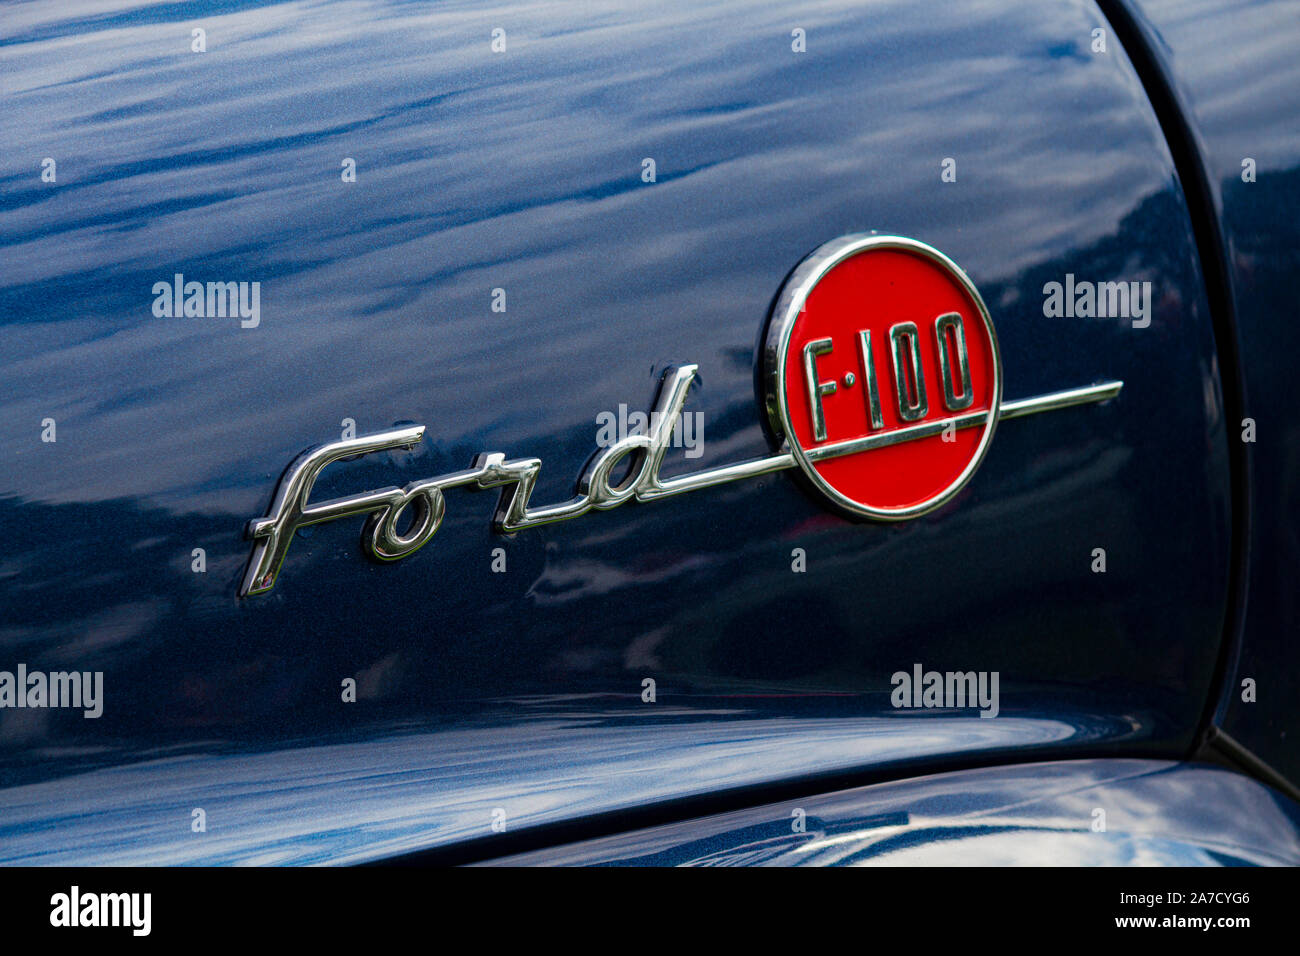 Badge emblem of a Ford F100 classic American truck Stock Photo